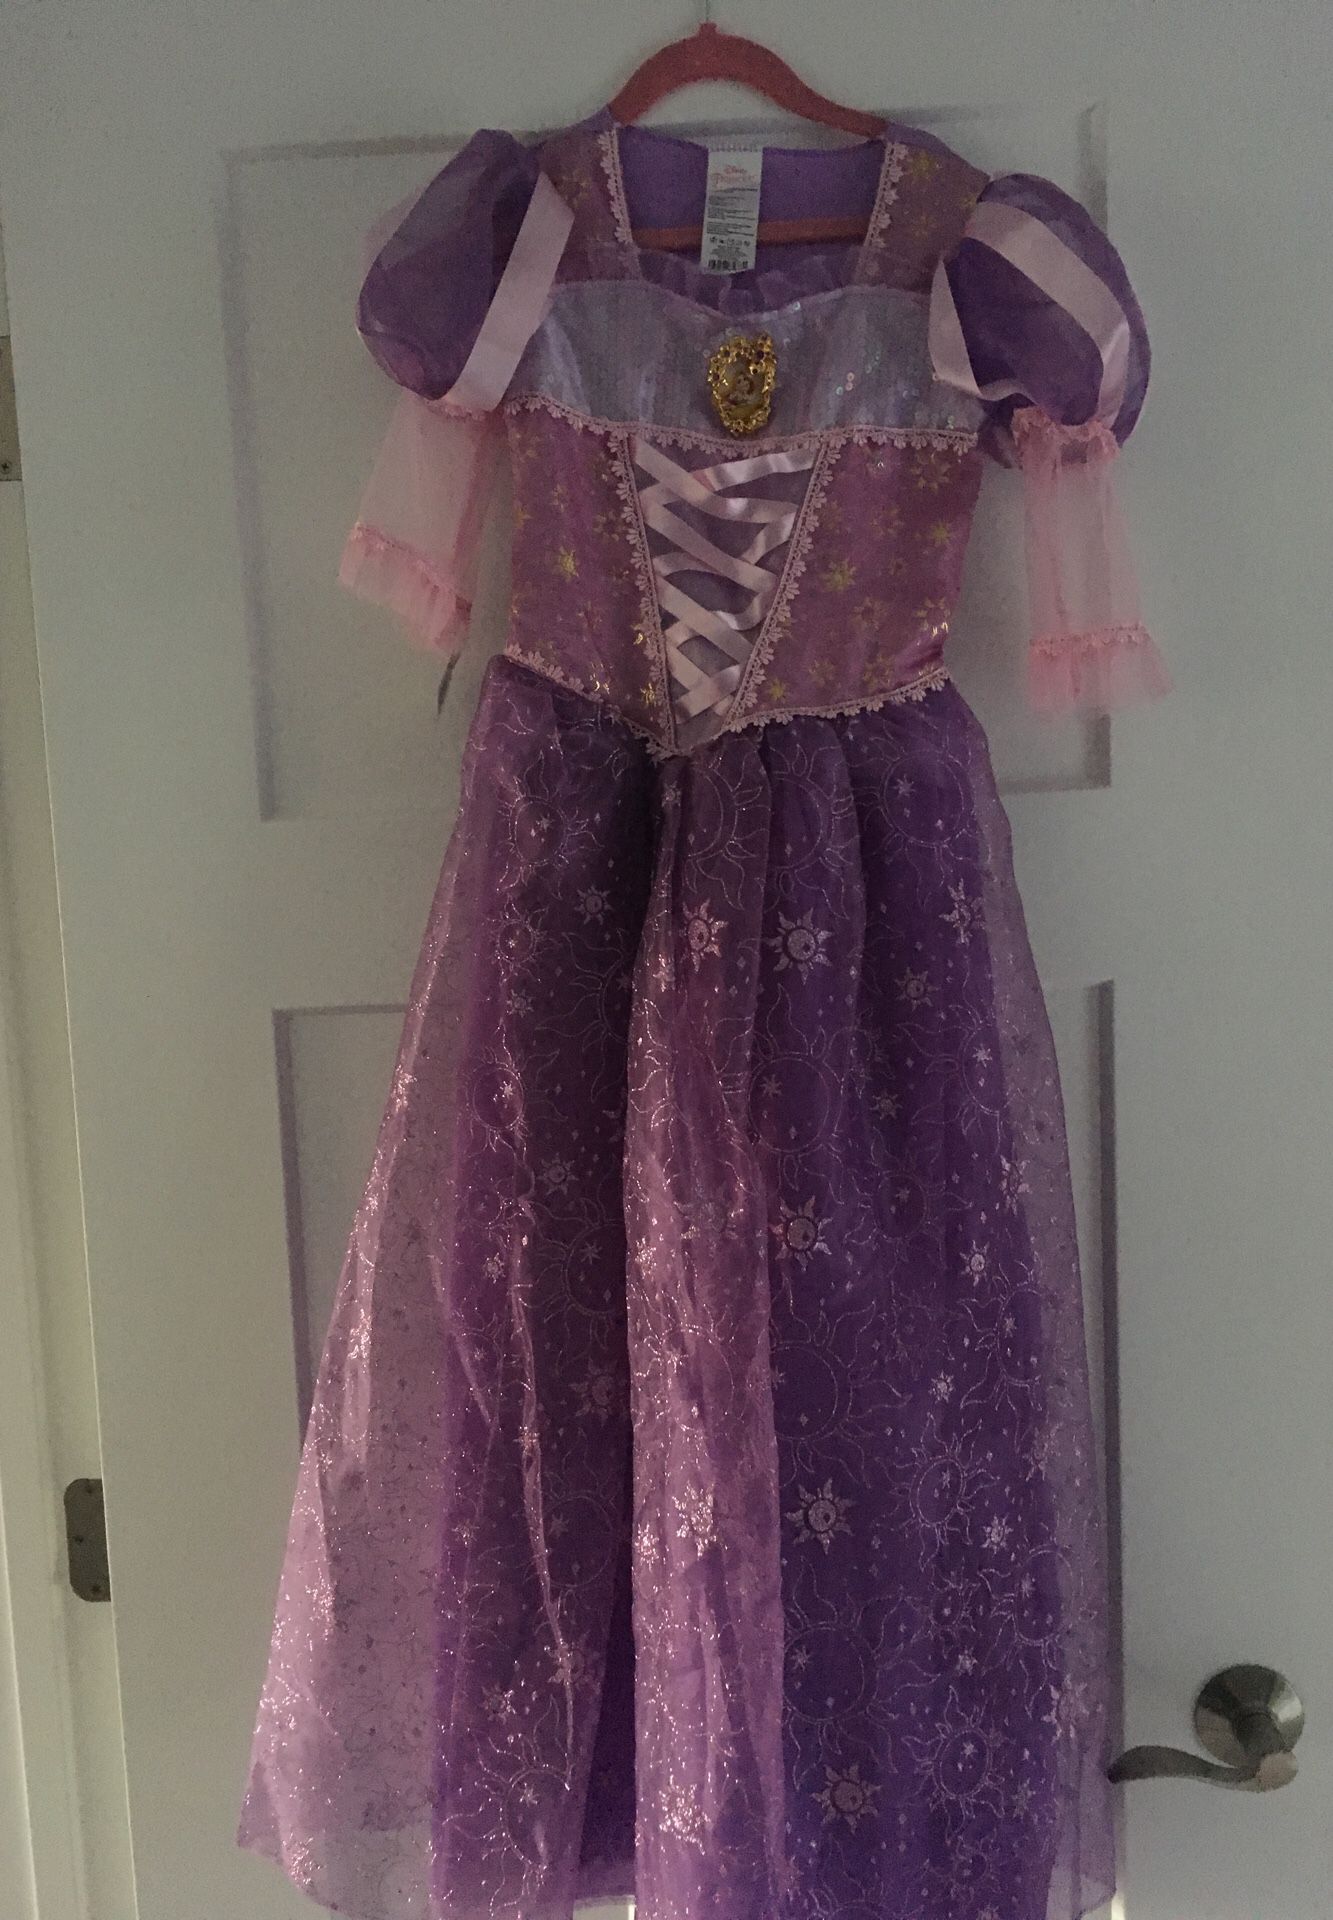 Disney Rapunzel Dress-up Costume Size 7 NEW and matching Hat